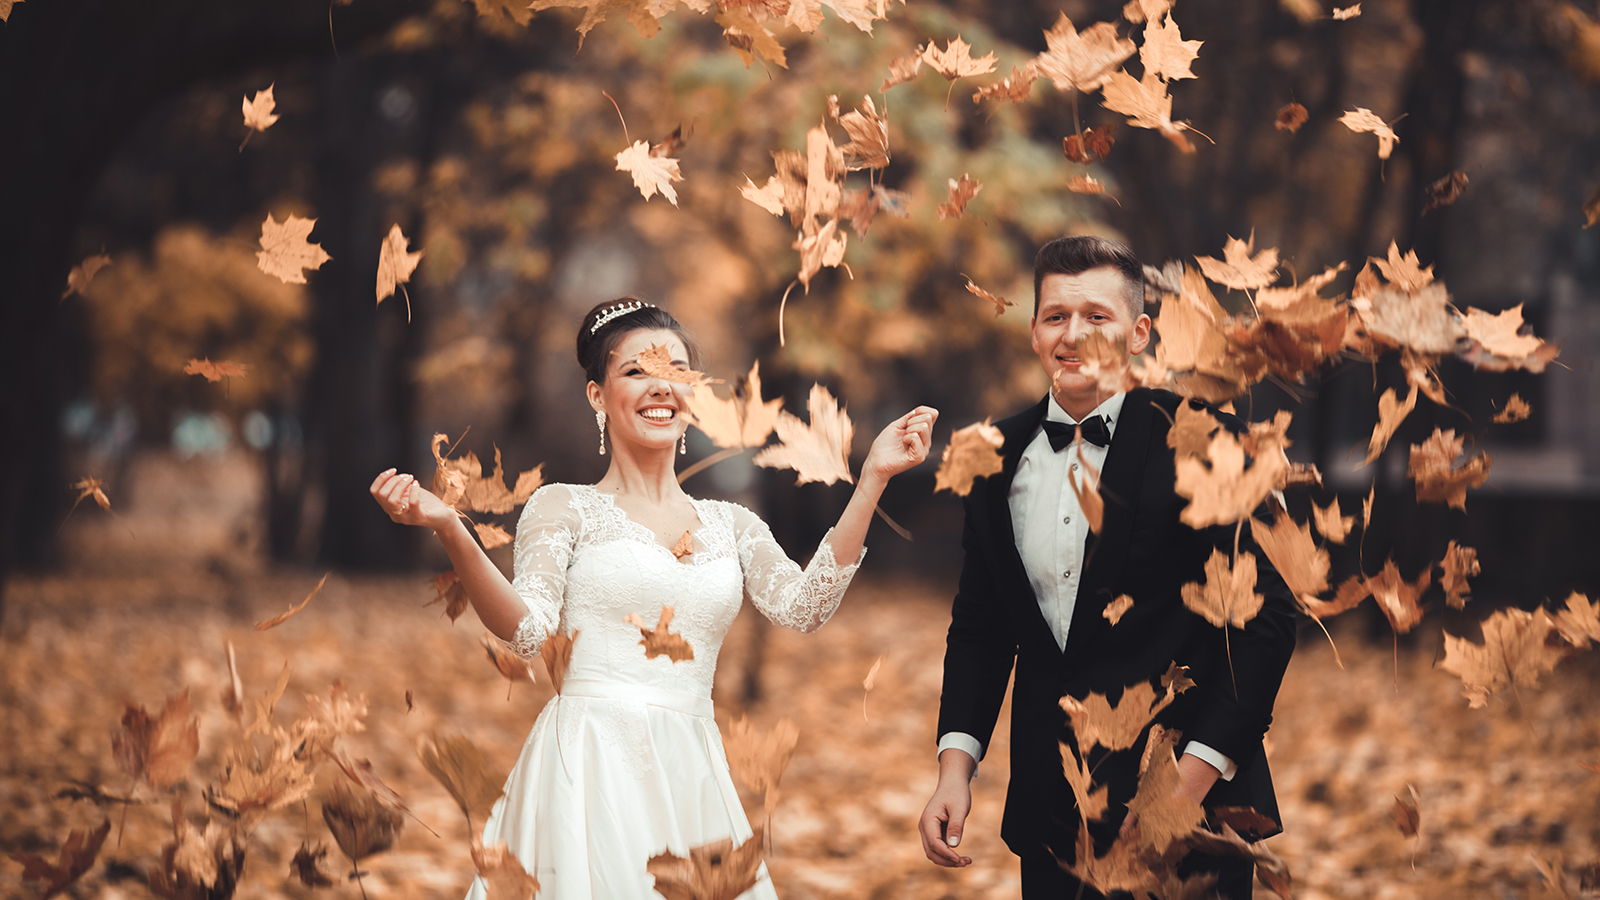 Luxury married wedding couple, bride and groom posing in park autumn.